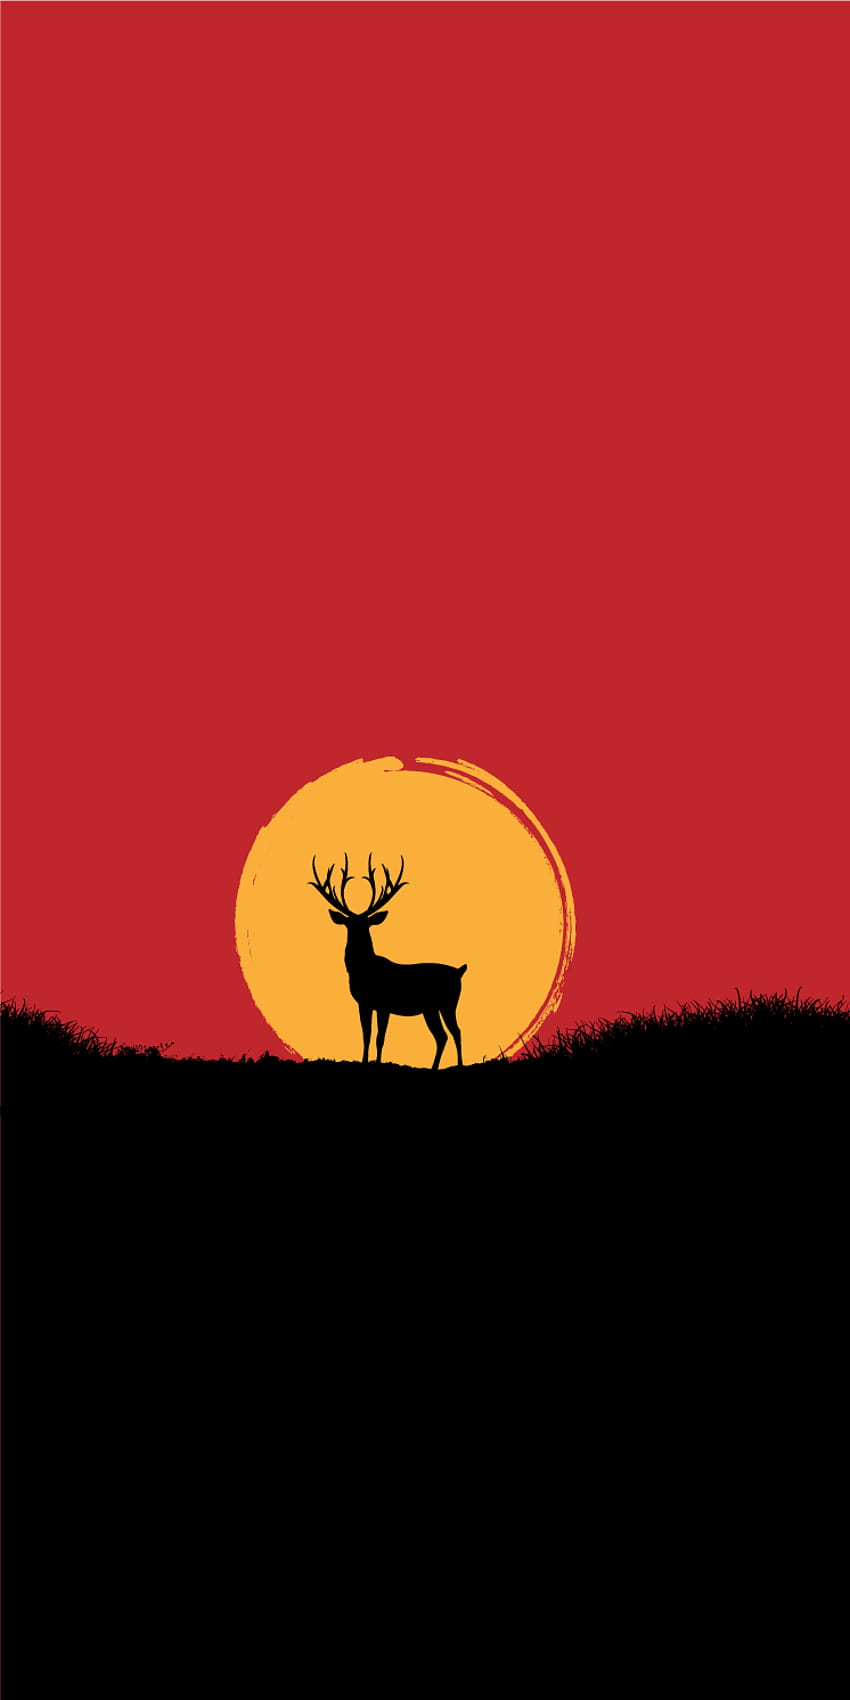 Deer at Sunset in 2021. Red dead redemption art, Red dead redemption artwork, Deer HD phone wallpaper